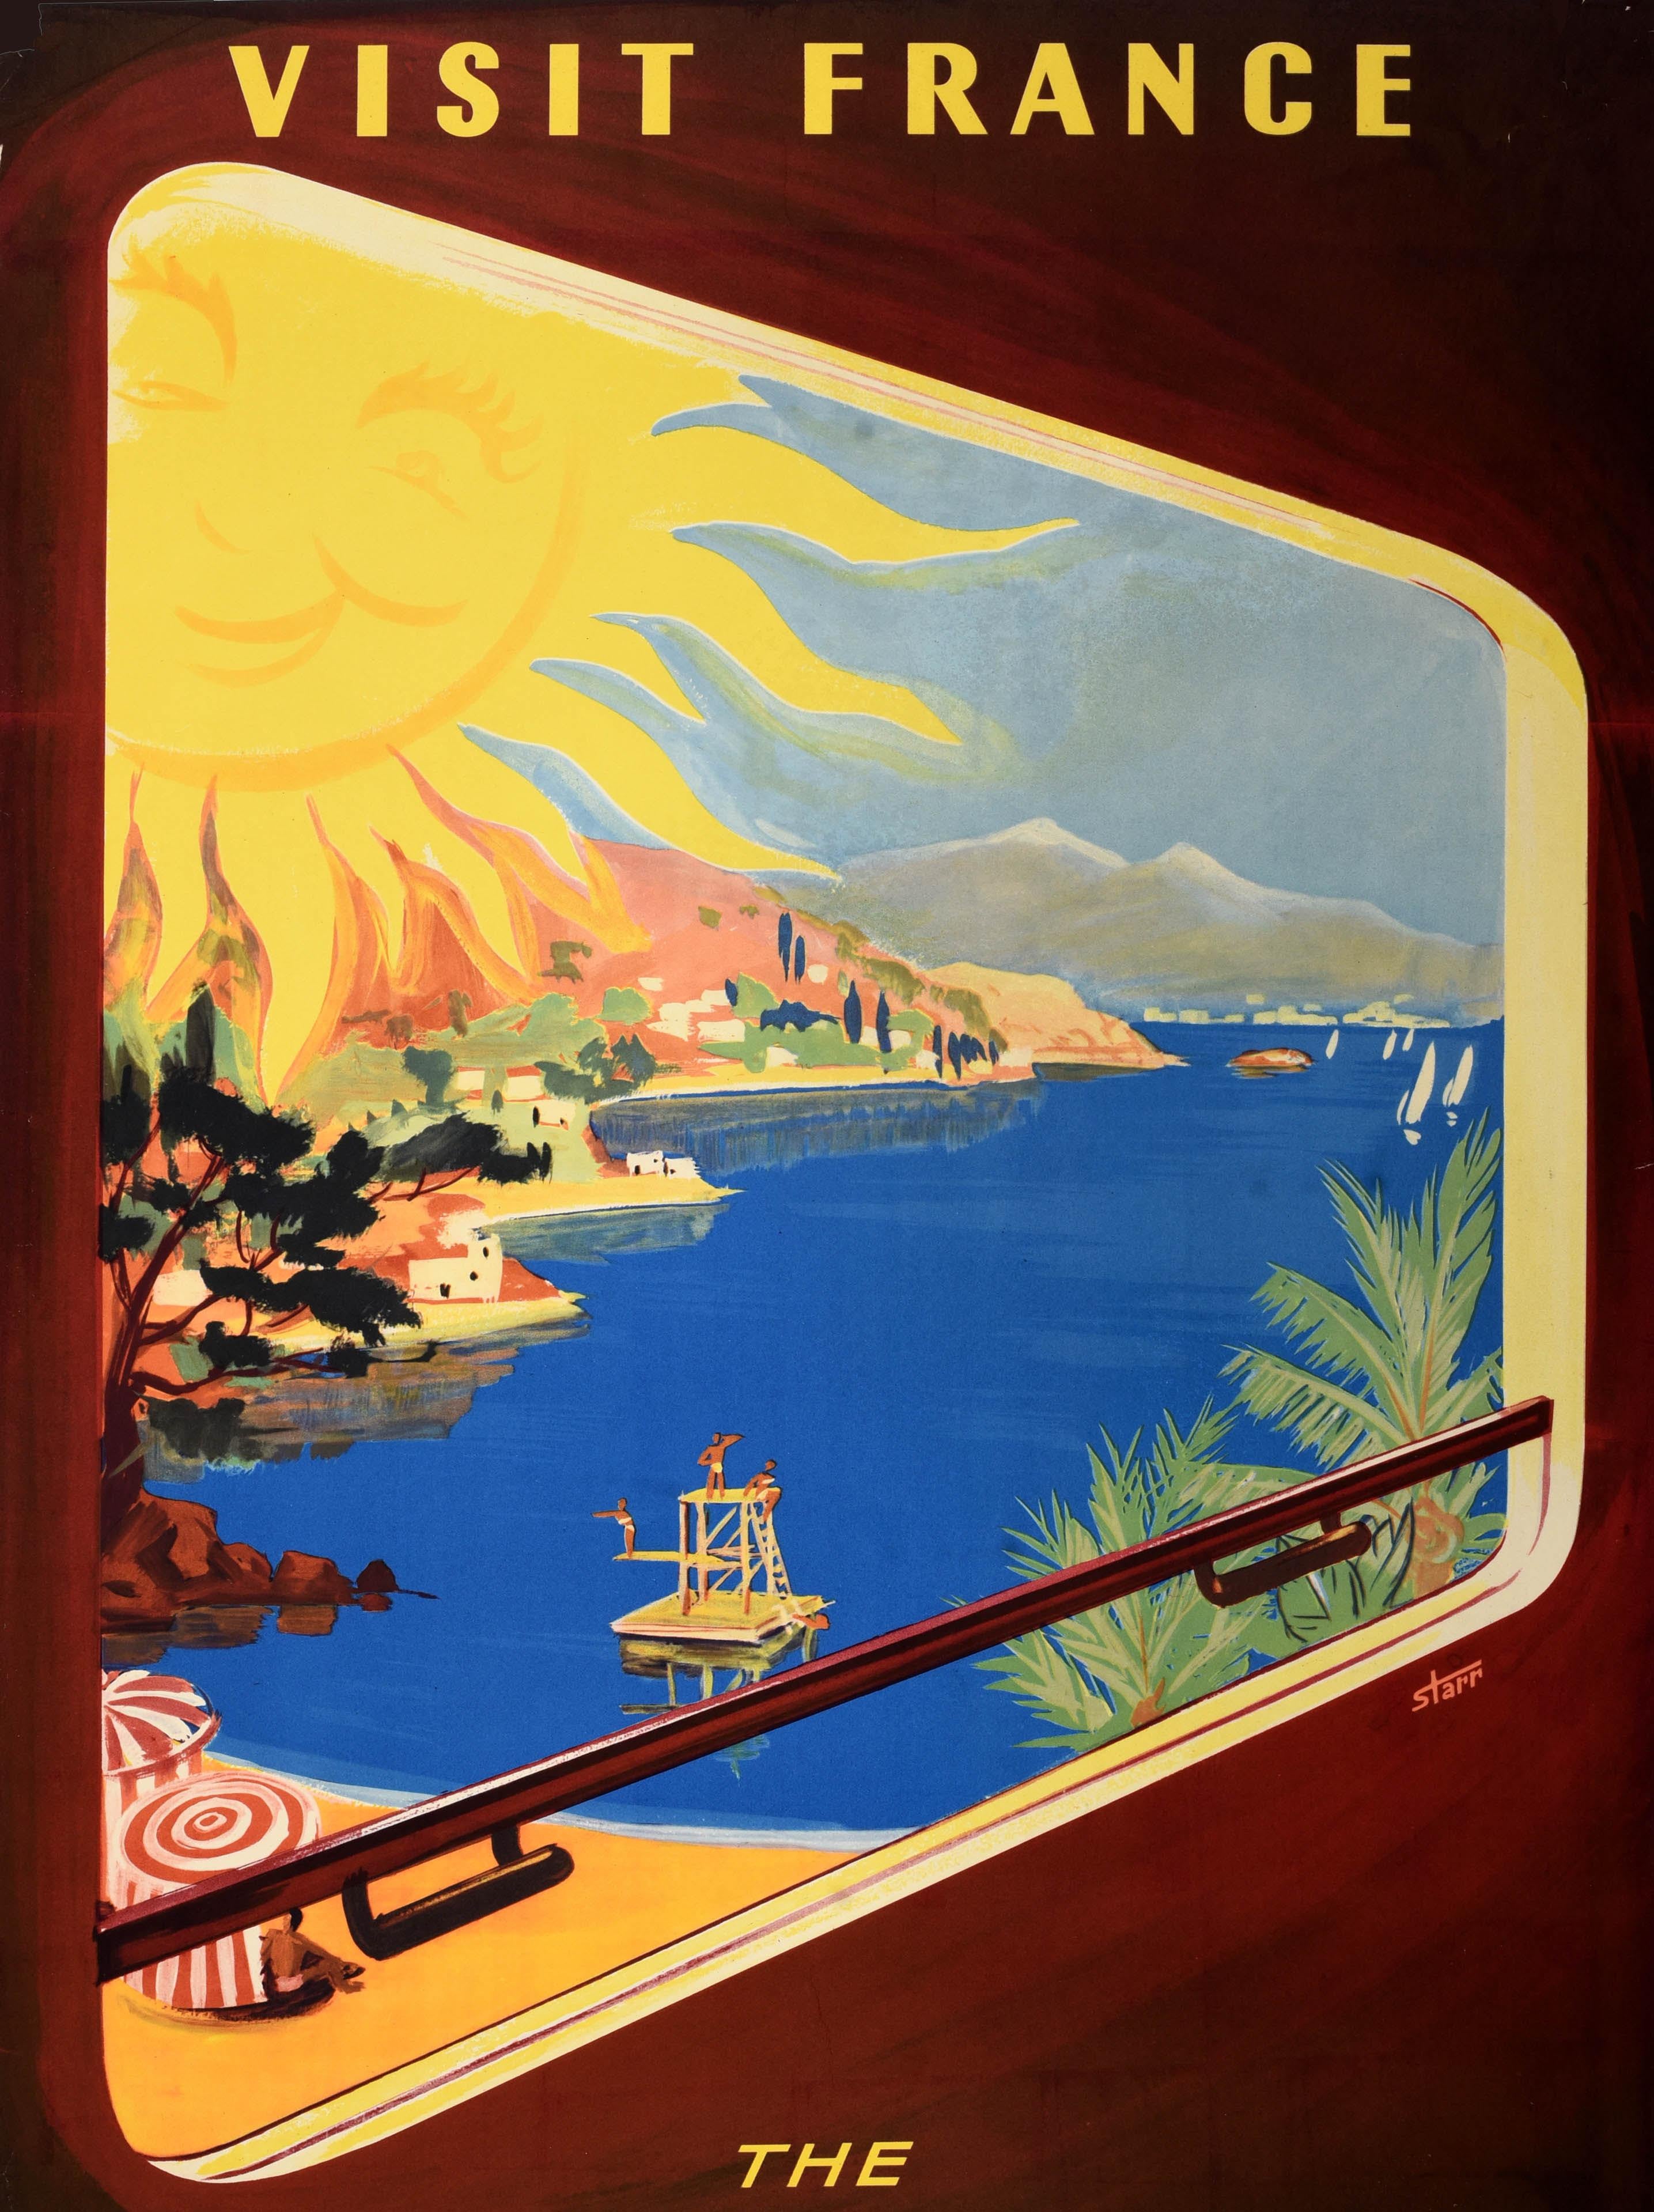 Original Vintage Travel Poster French Riviera SNCF Visit France Starr Midcentury - Black Print by Unknown